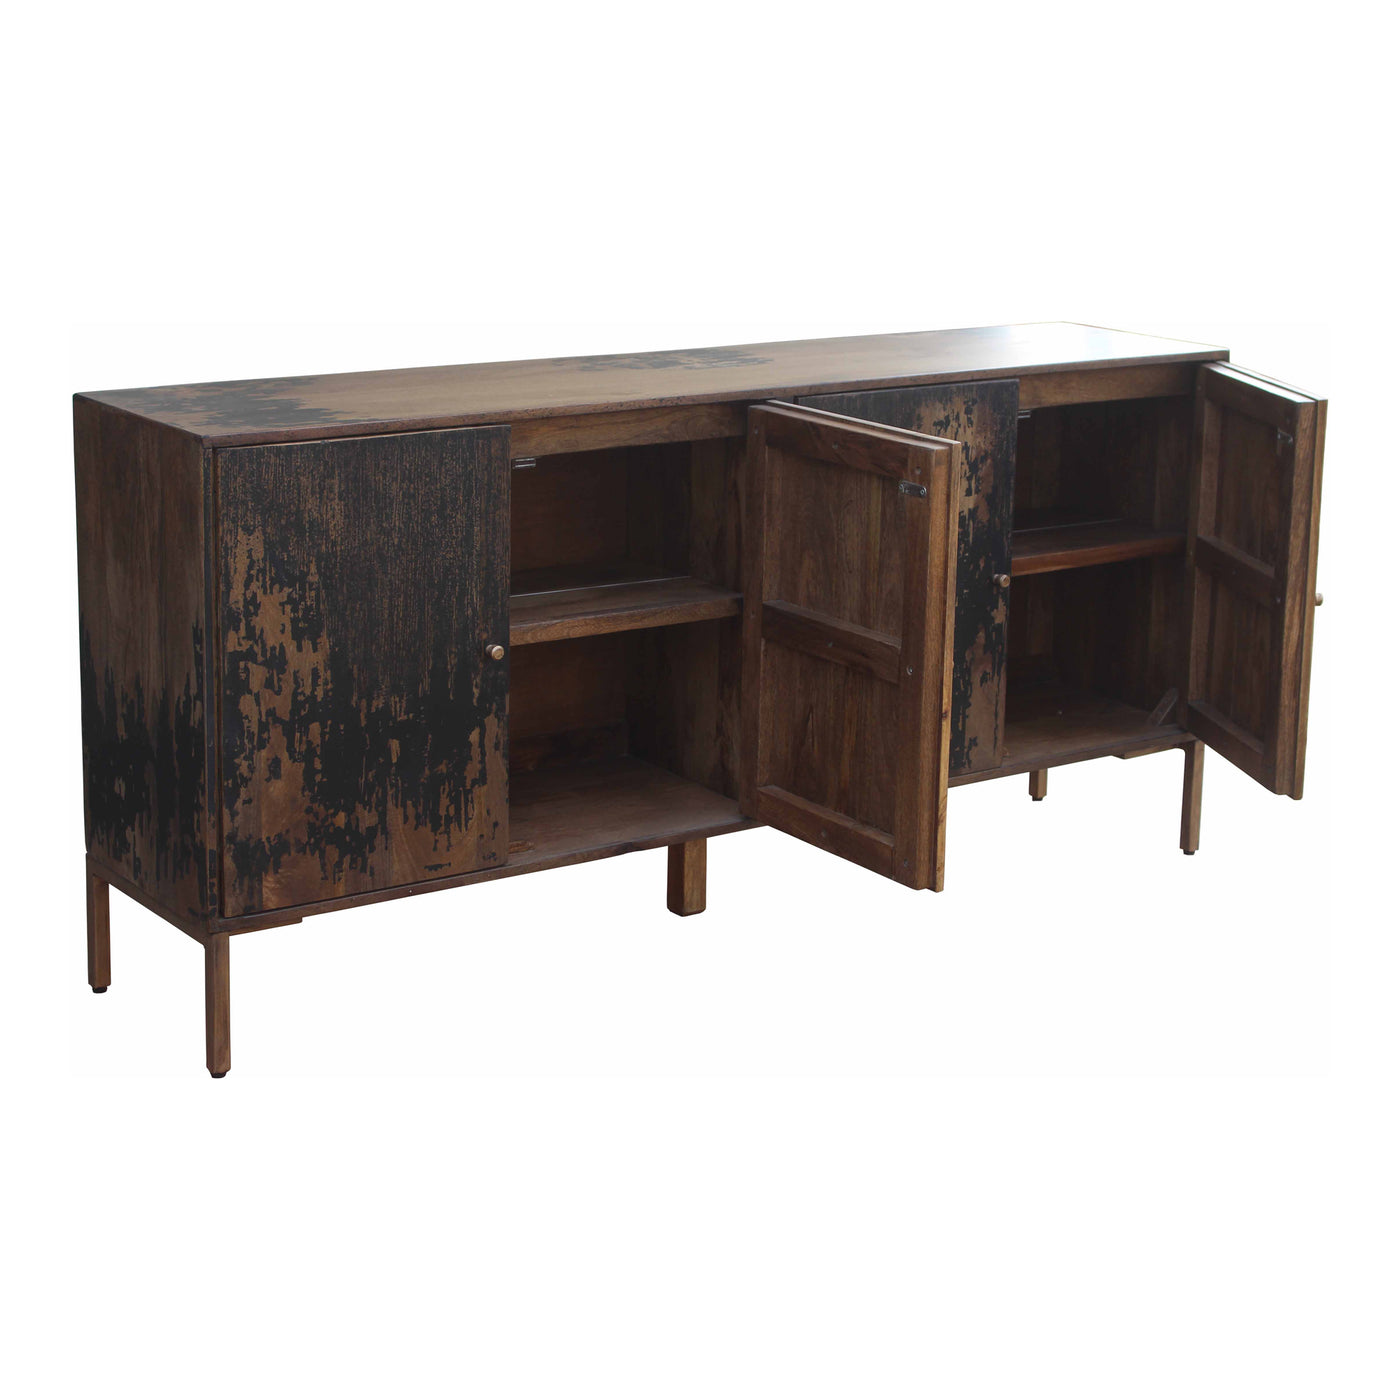 With a rustic finish, this solid hardwood sideboard will feel like it's been a part of your family for generations. The fo...